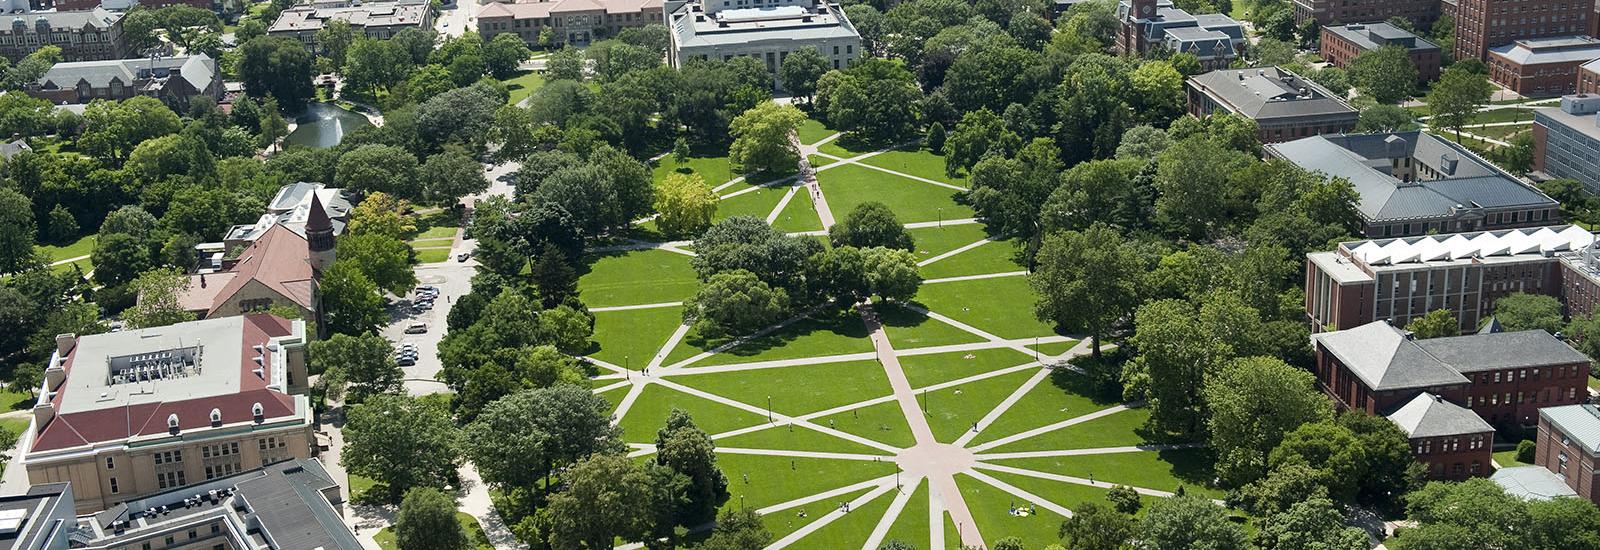 Aerial view of the Ohio State University Oval green space